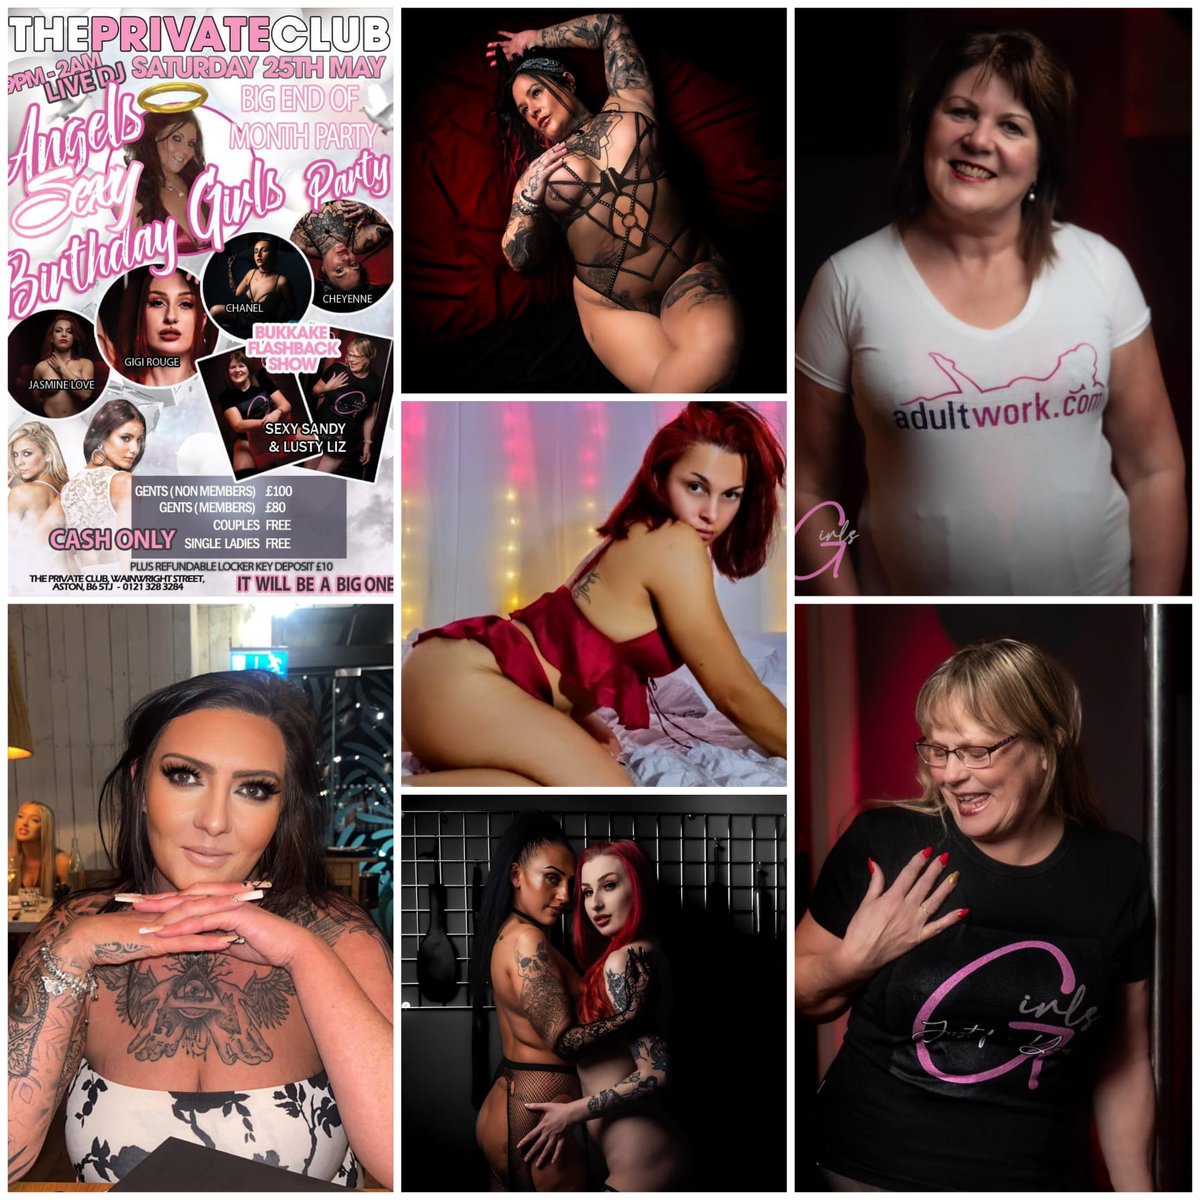 It's a special End Of The Month Party this month - it's Angel's Birthday! Throw back Bukkake with @CassandraUk1 and @Lustyliz1 followed by a gangbang with @chanellawellaa @Jasmine_Love_23 @CheyenneRose_80 and @littlegigi79 What a way to celebrate 🍾 Call 07849 739 434 or…